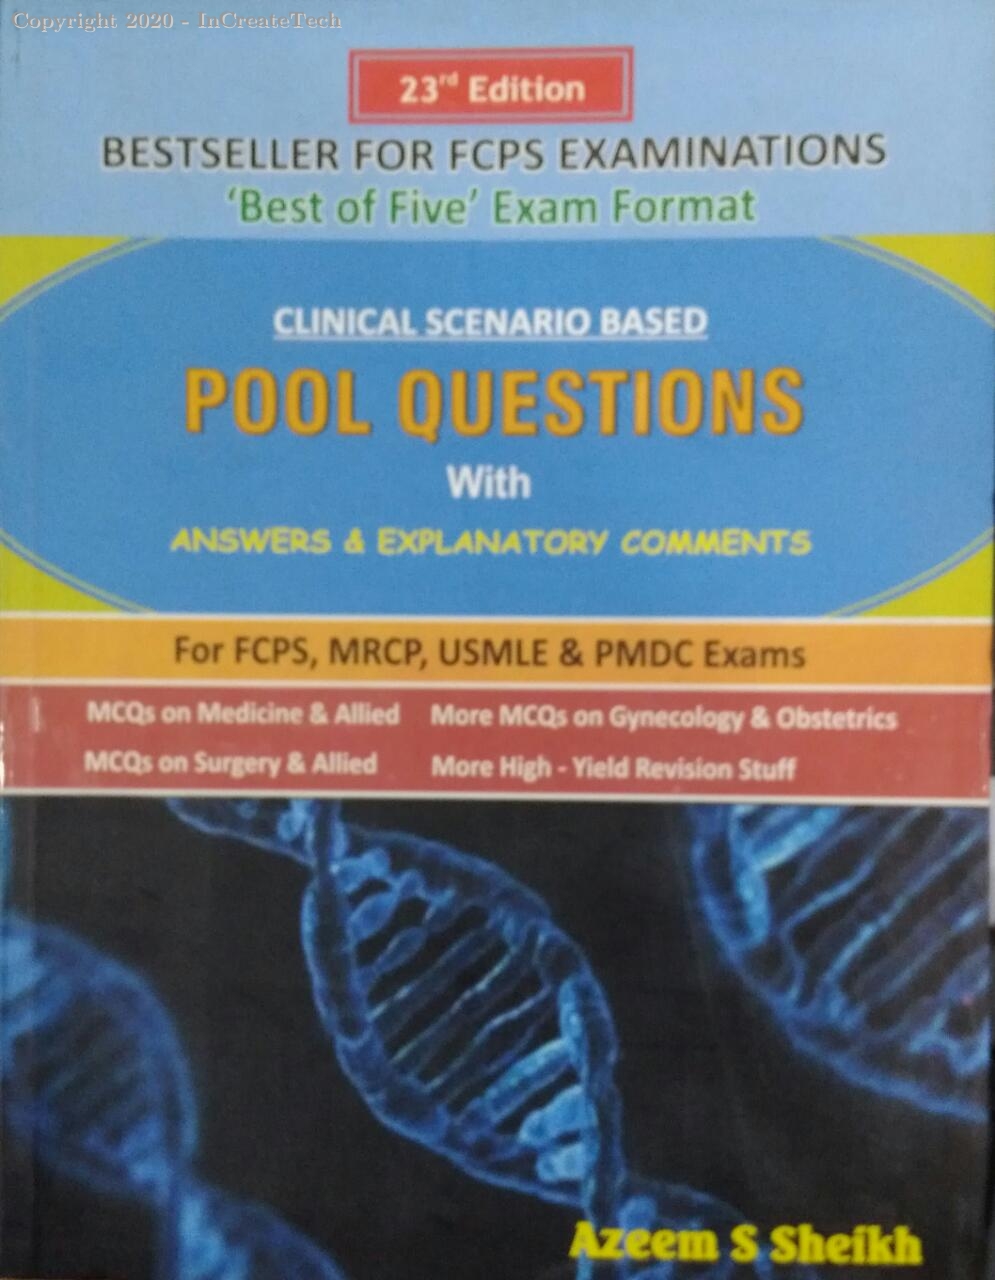 CLINICAL SCENARIO BASES POOL QUESTIONS WITH ANSWER & EXPLANATORY COMMENTS